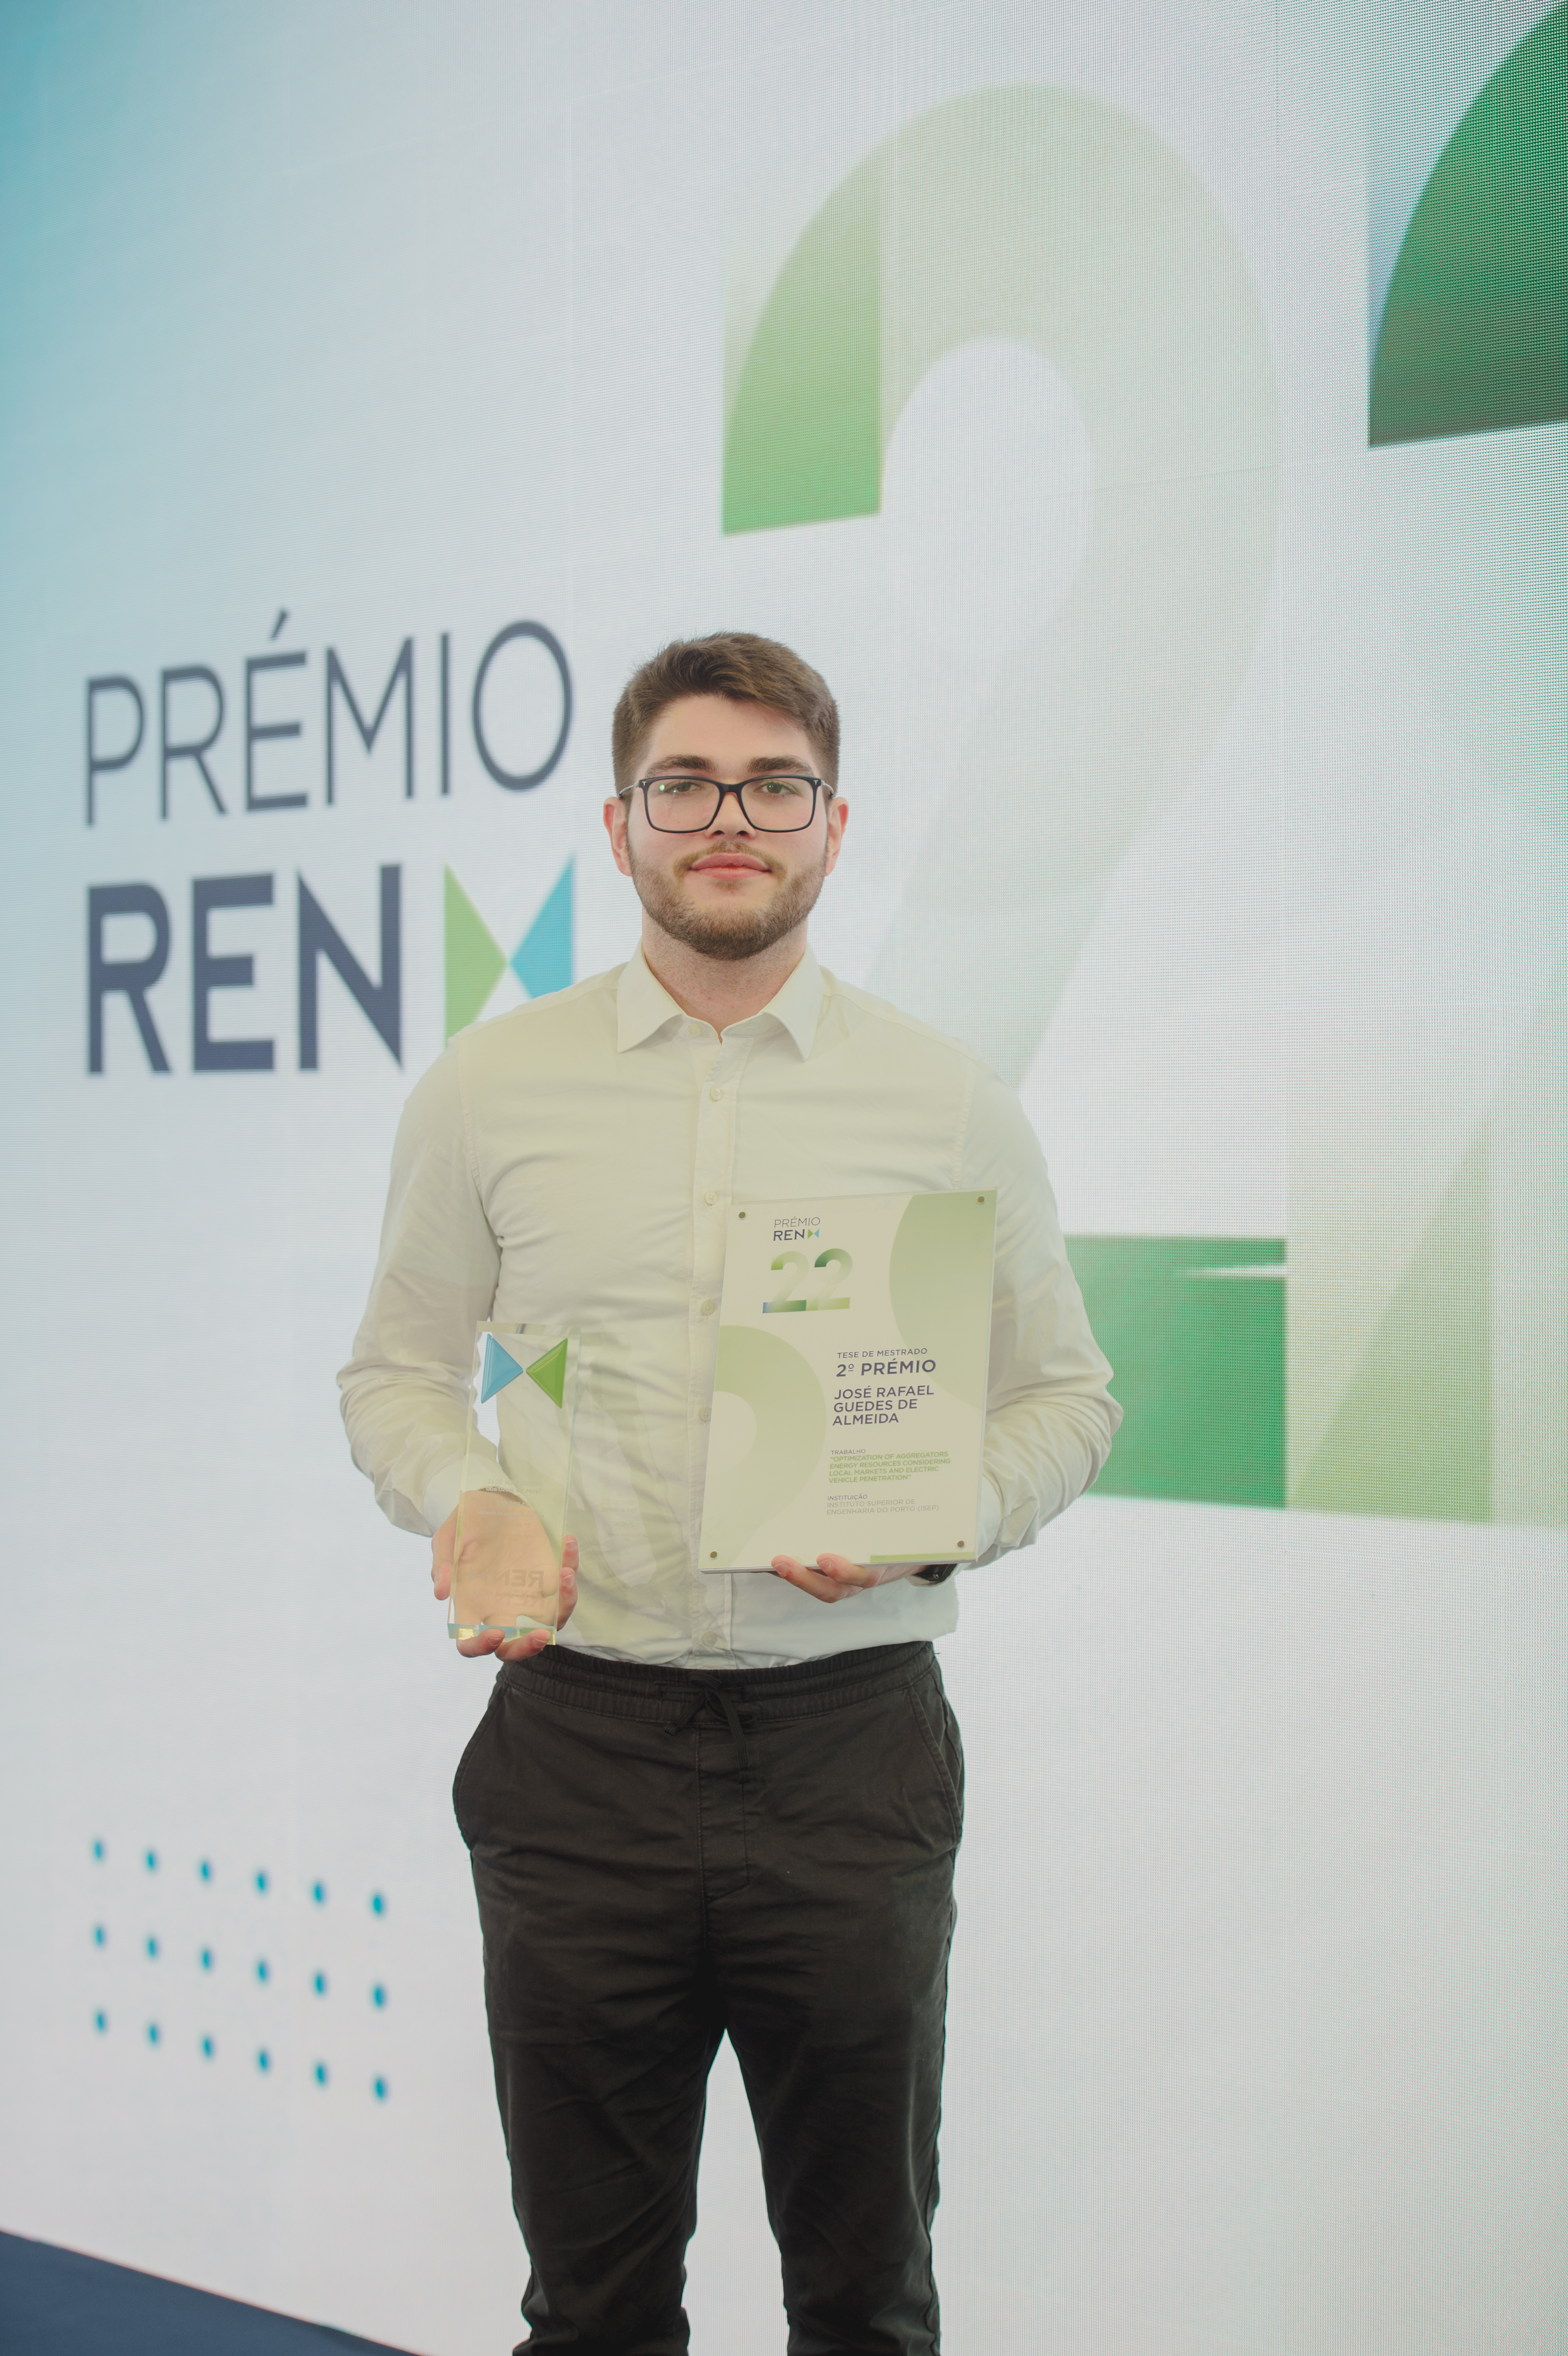 José Almeida awarded second place at the REN Prize